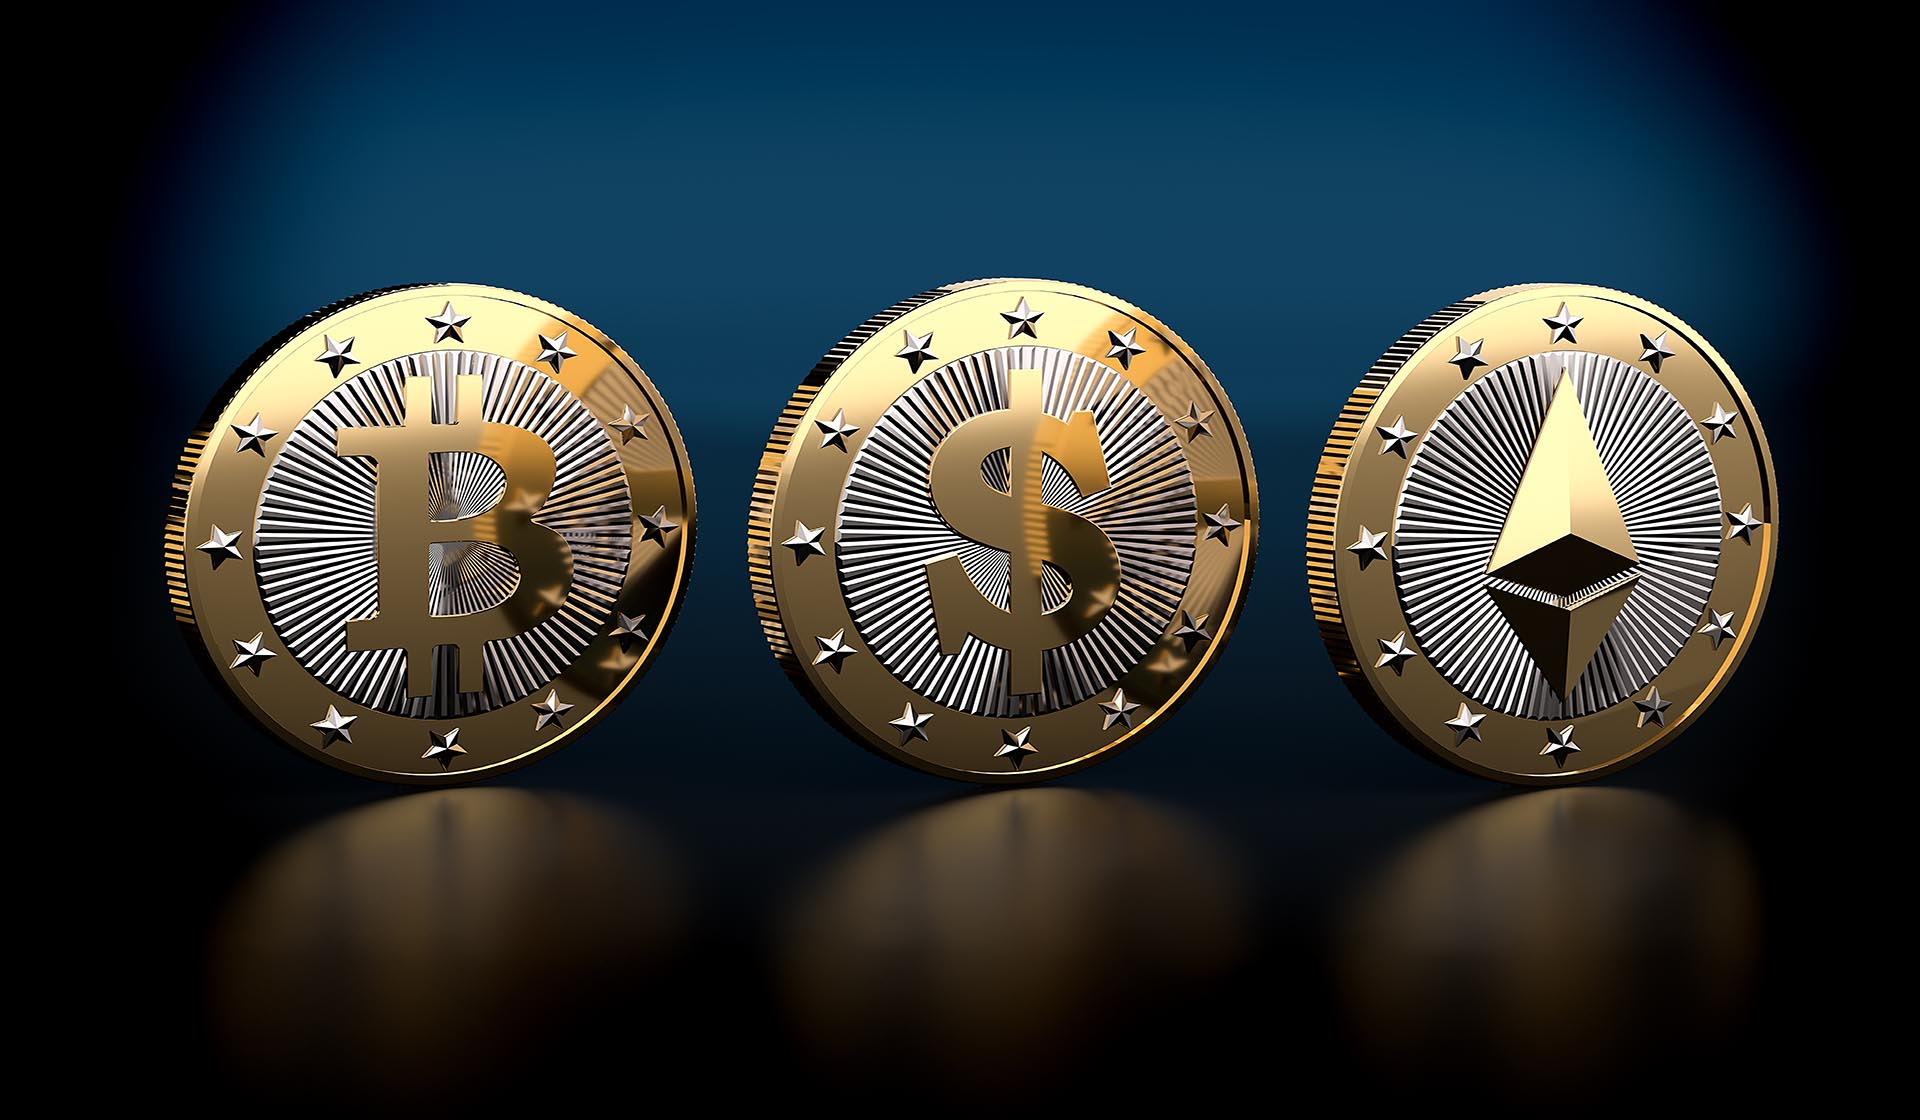 Bitcoin IRA Offers Bitcoin and Ethereum Retirement Investment Portfolios to Clients